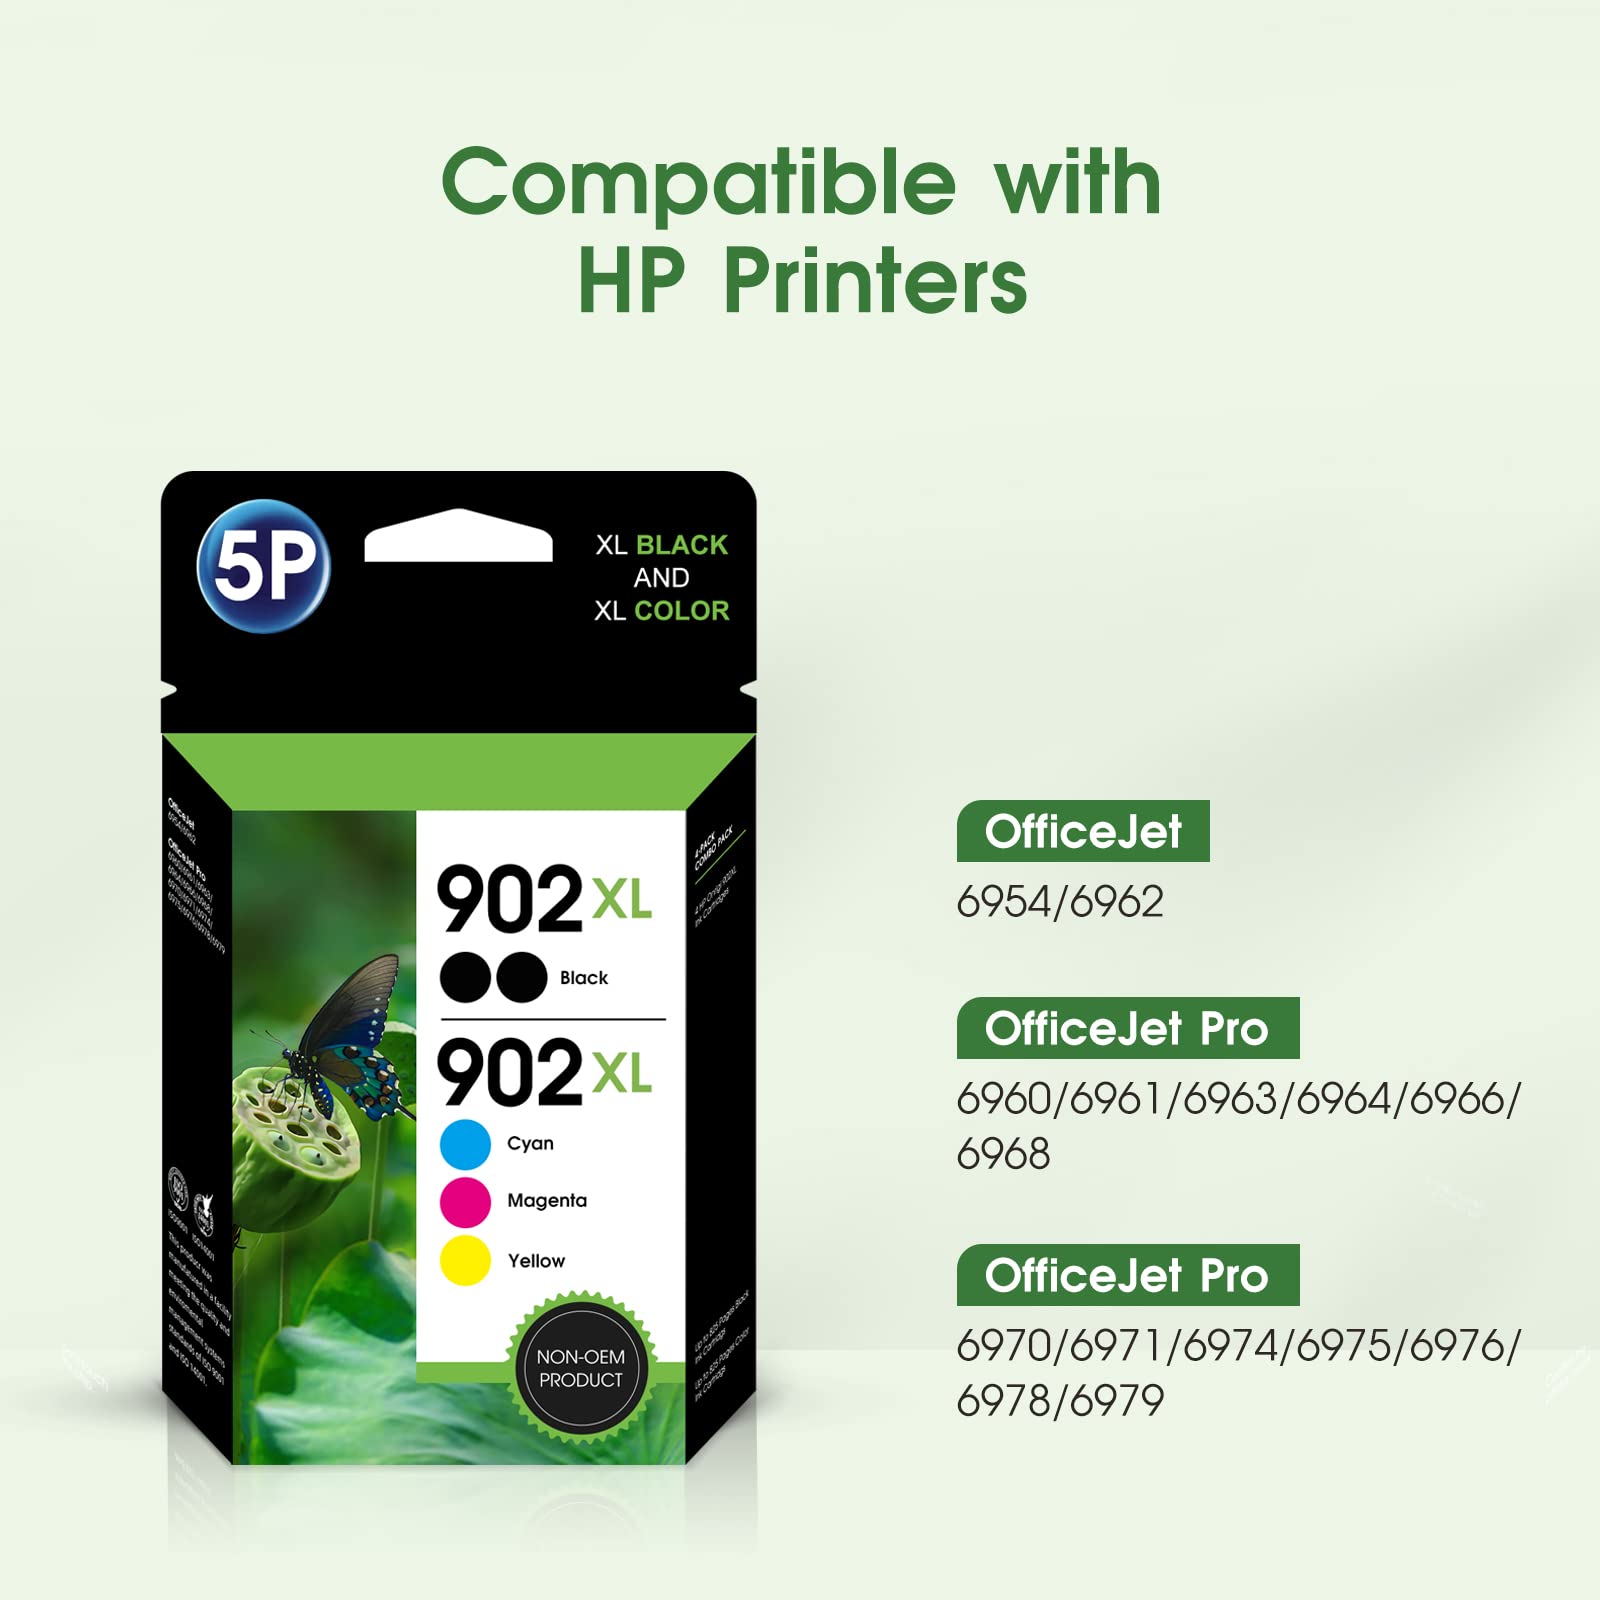 902XL Ink Cartridge Compatible for HP 902 XL 2 Black, Cyan, Magenta, Yellow Ink Cartridges (5 Combo Pack) Work with Officejet Pro 6978 6968 6970 6960 6962 6958 6954 6950 6951 Printers